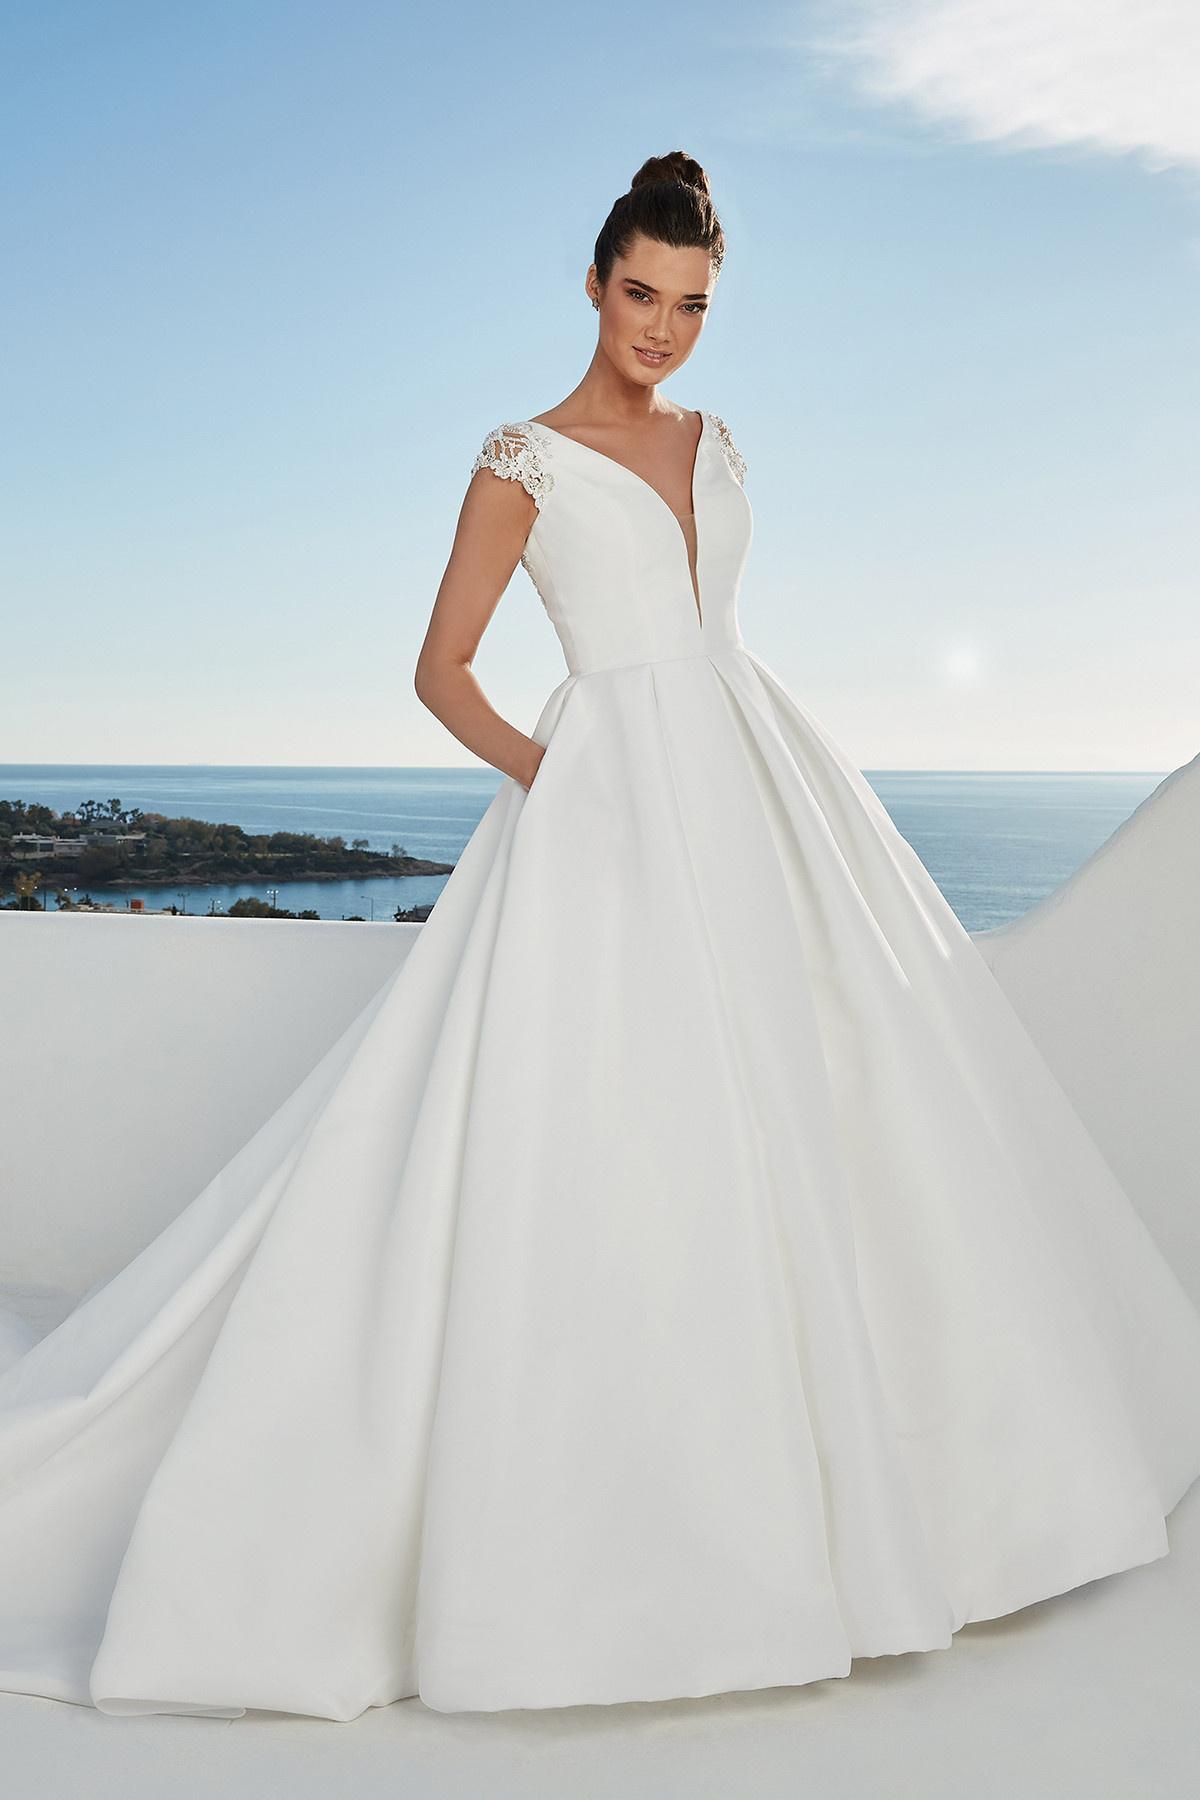 White Justin Alexander ballgown with lace shoulders and a plain skirt